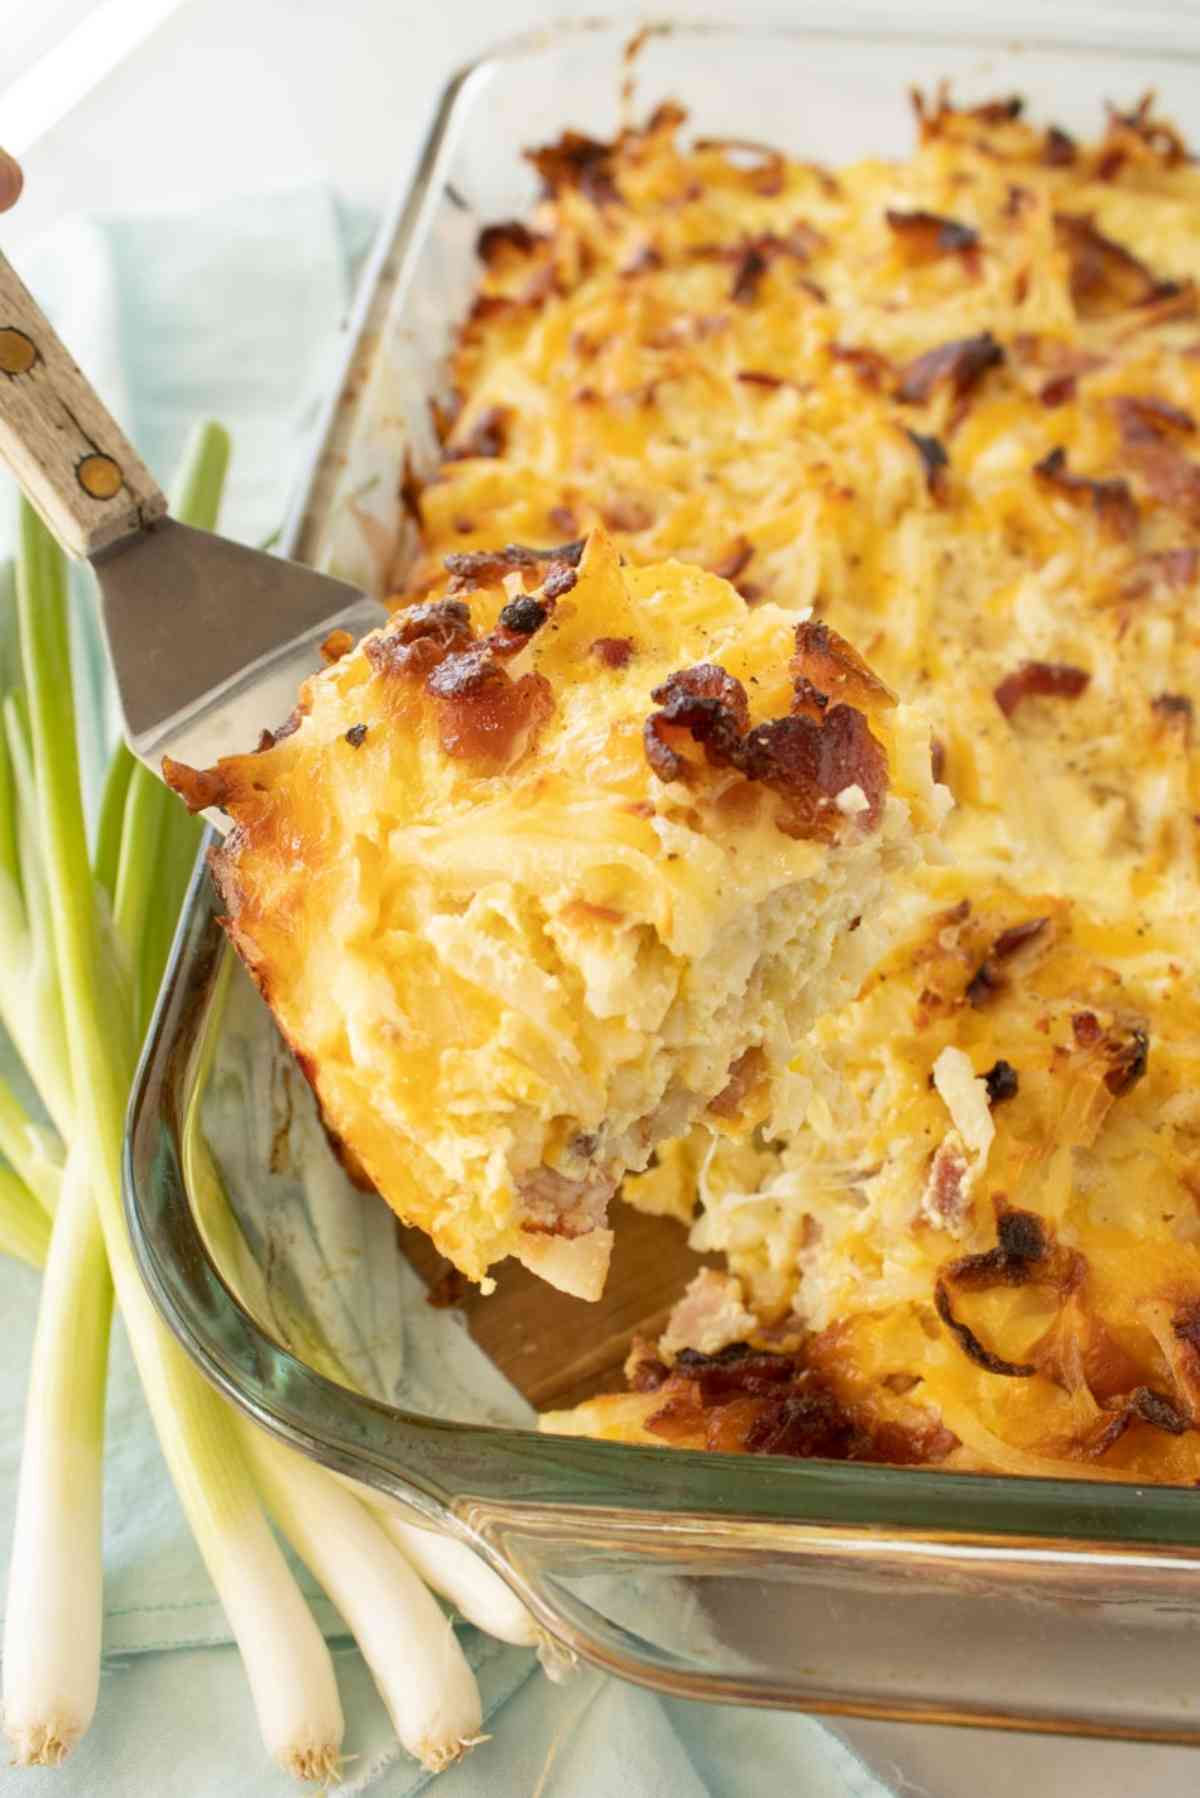 Baked hash brown casserole full of bacon and cheese!